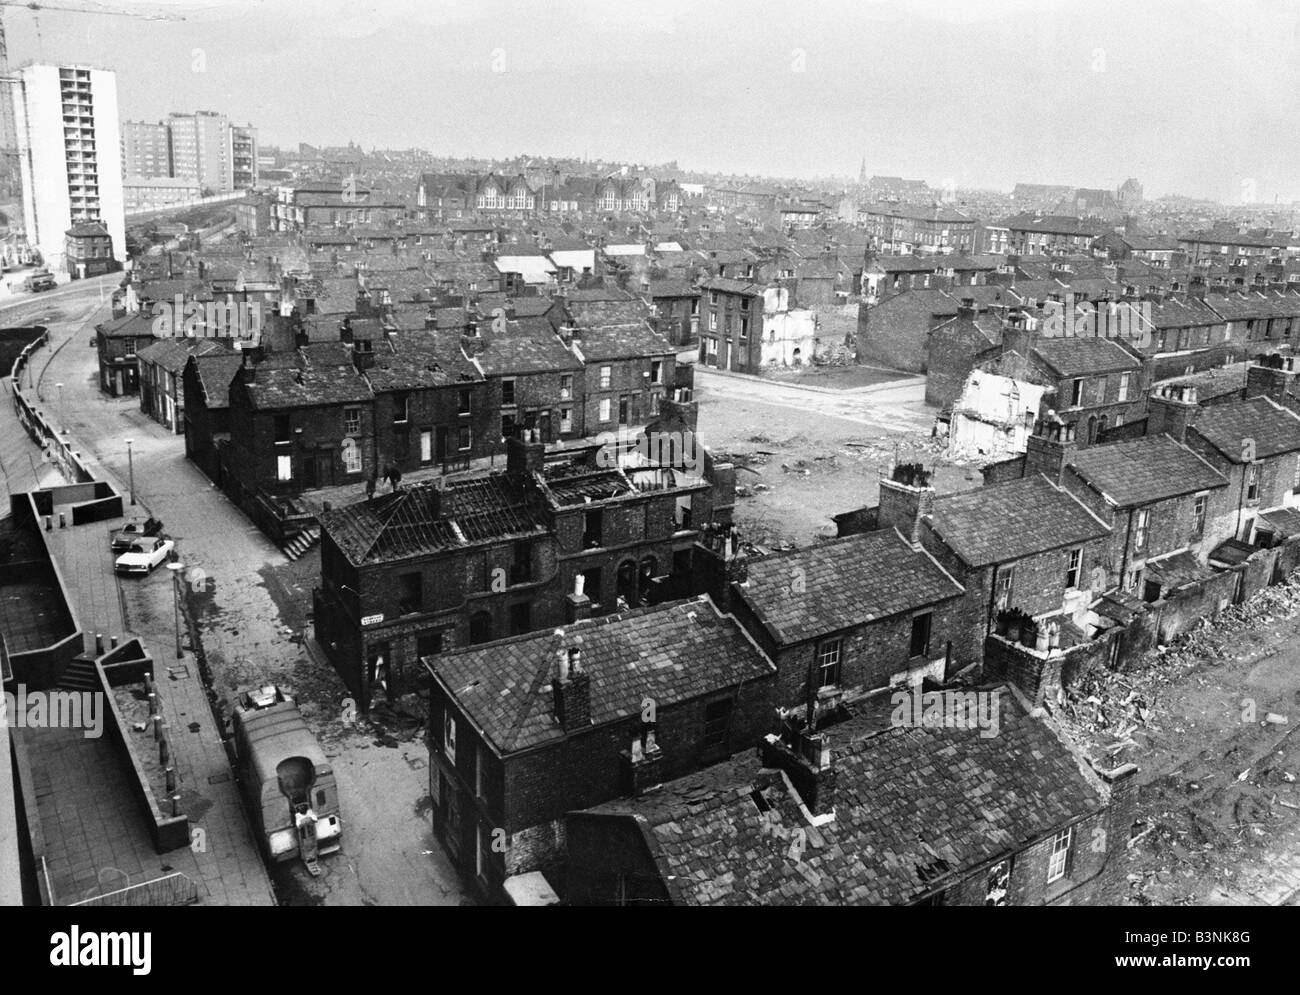 Demolition of the Sampson Street and Kapler Street area of Everton Re Development building flats March 1966 Stock Photo